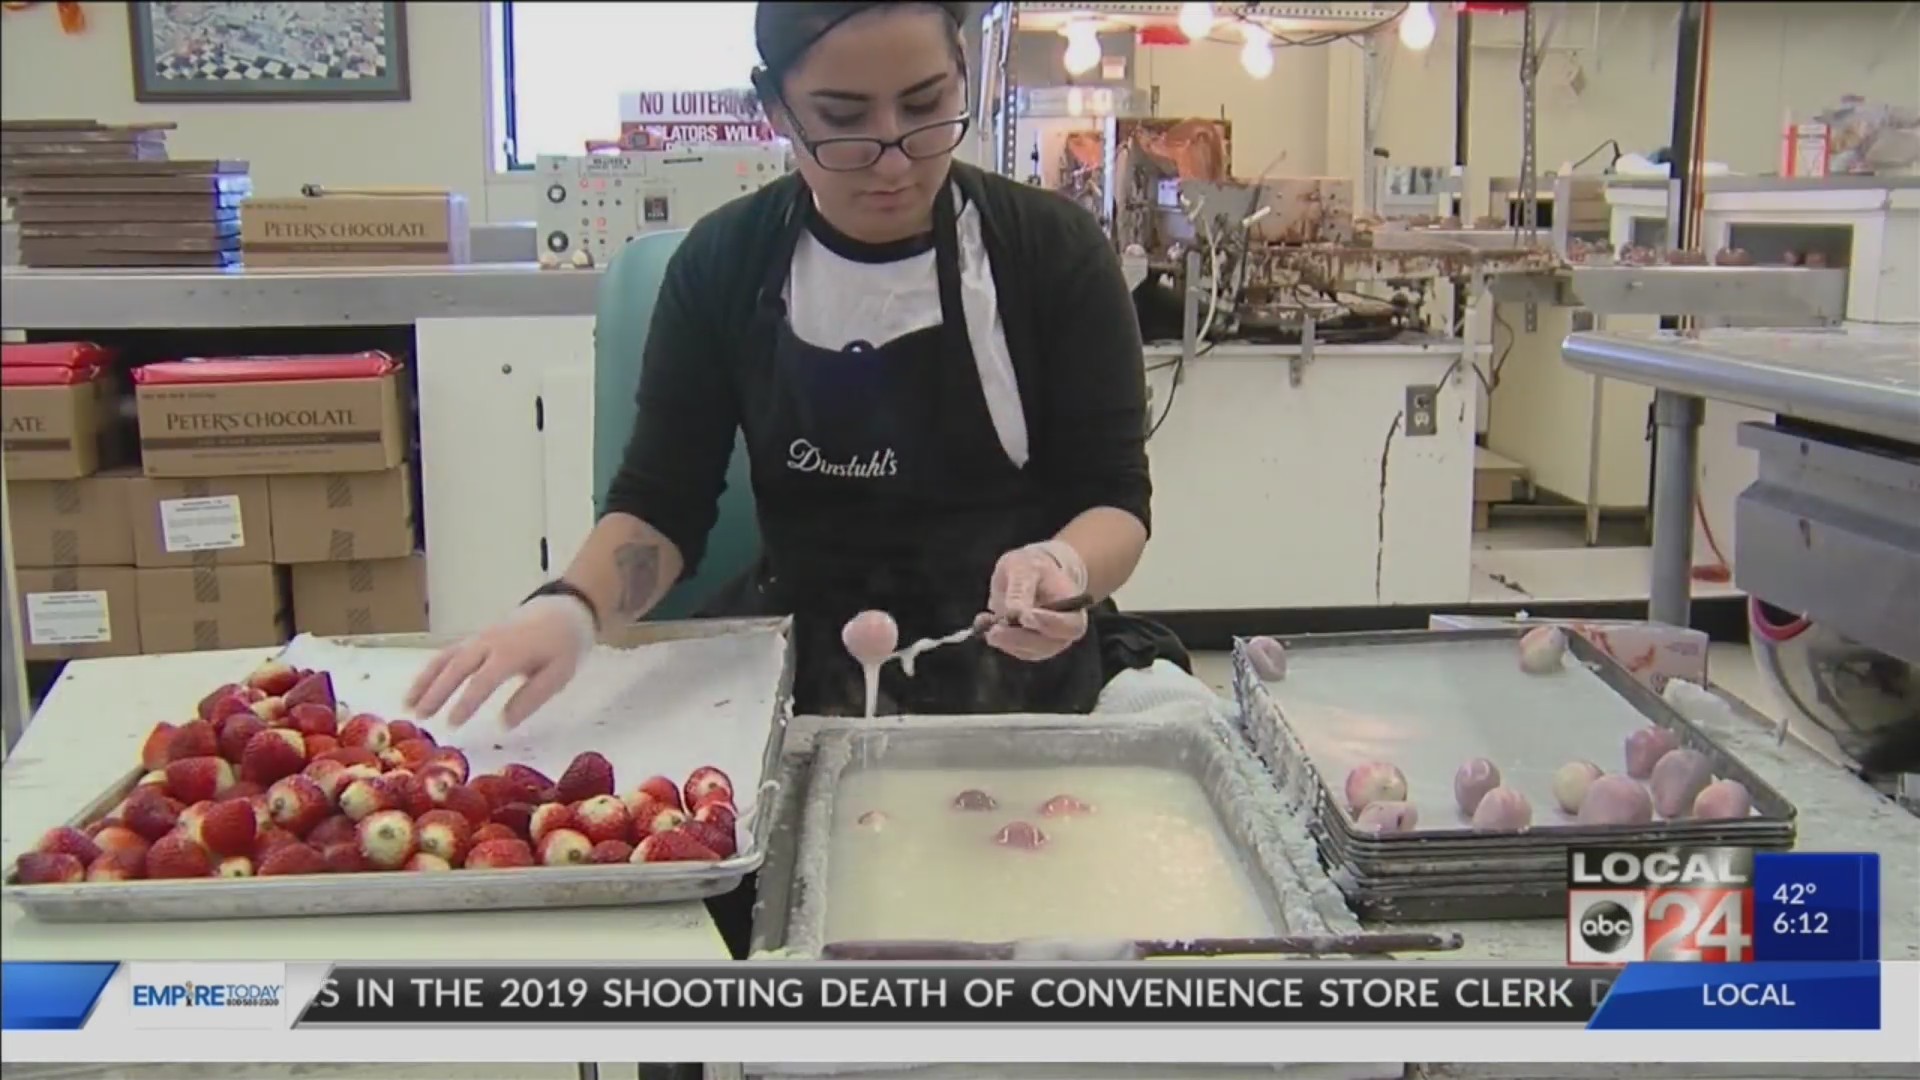 Dinstuhl's Candies is getting ready for the Valentine's Day rush